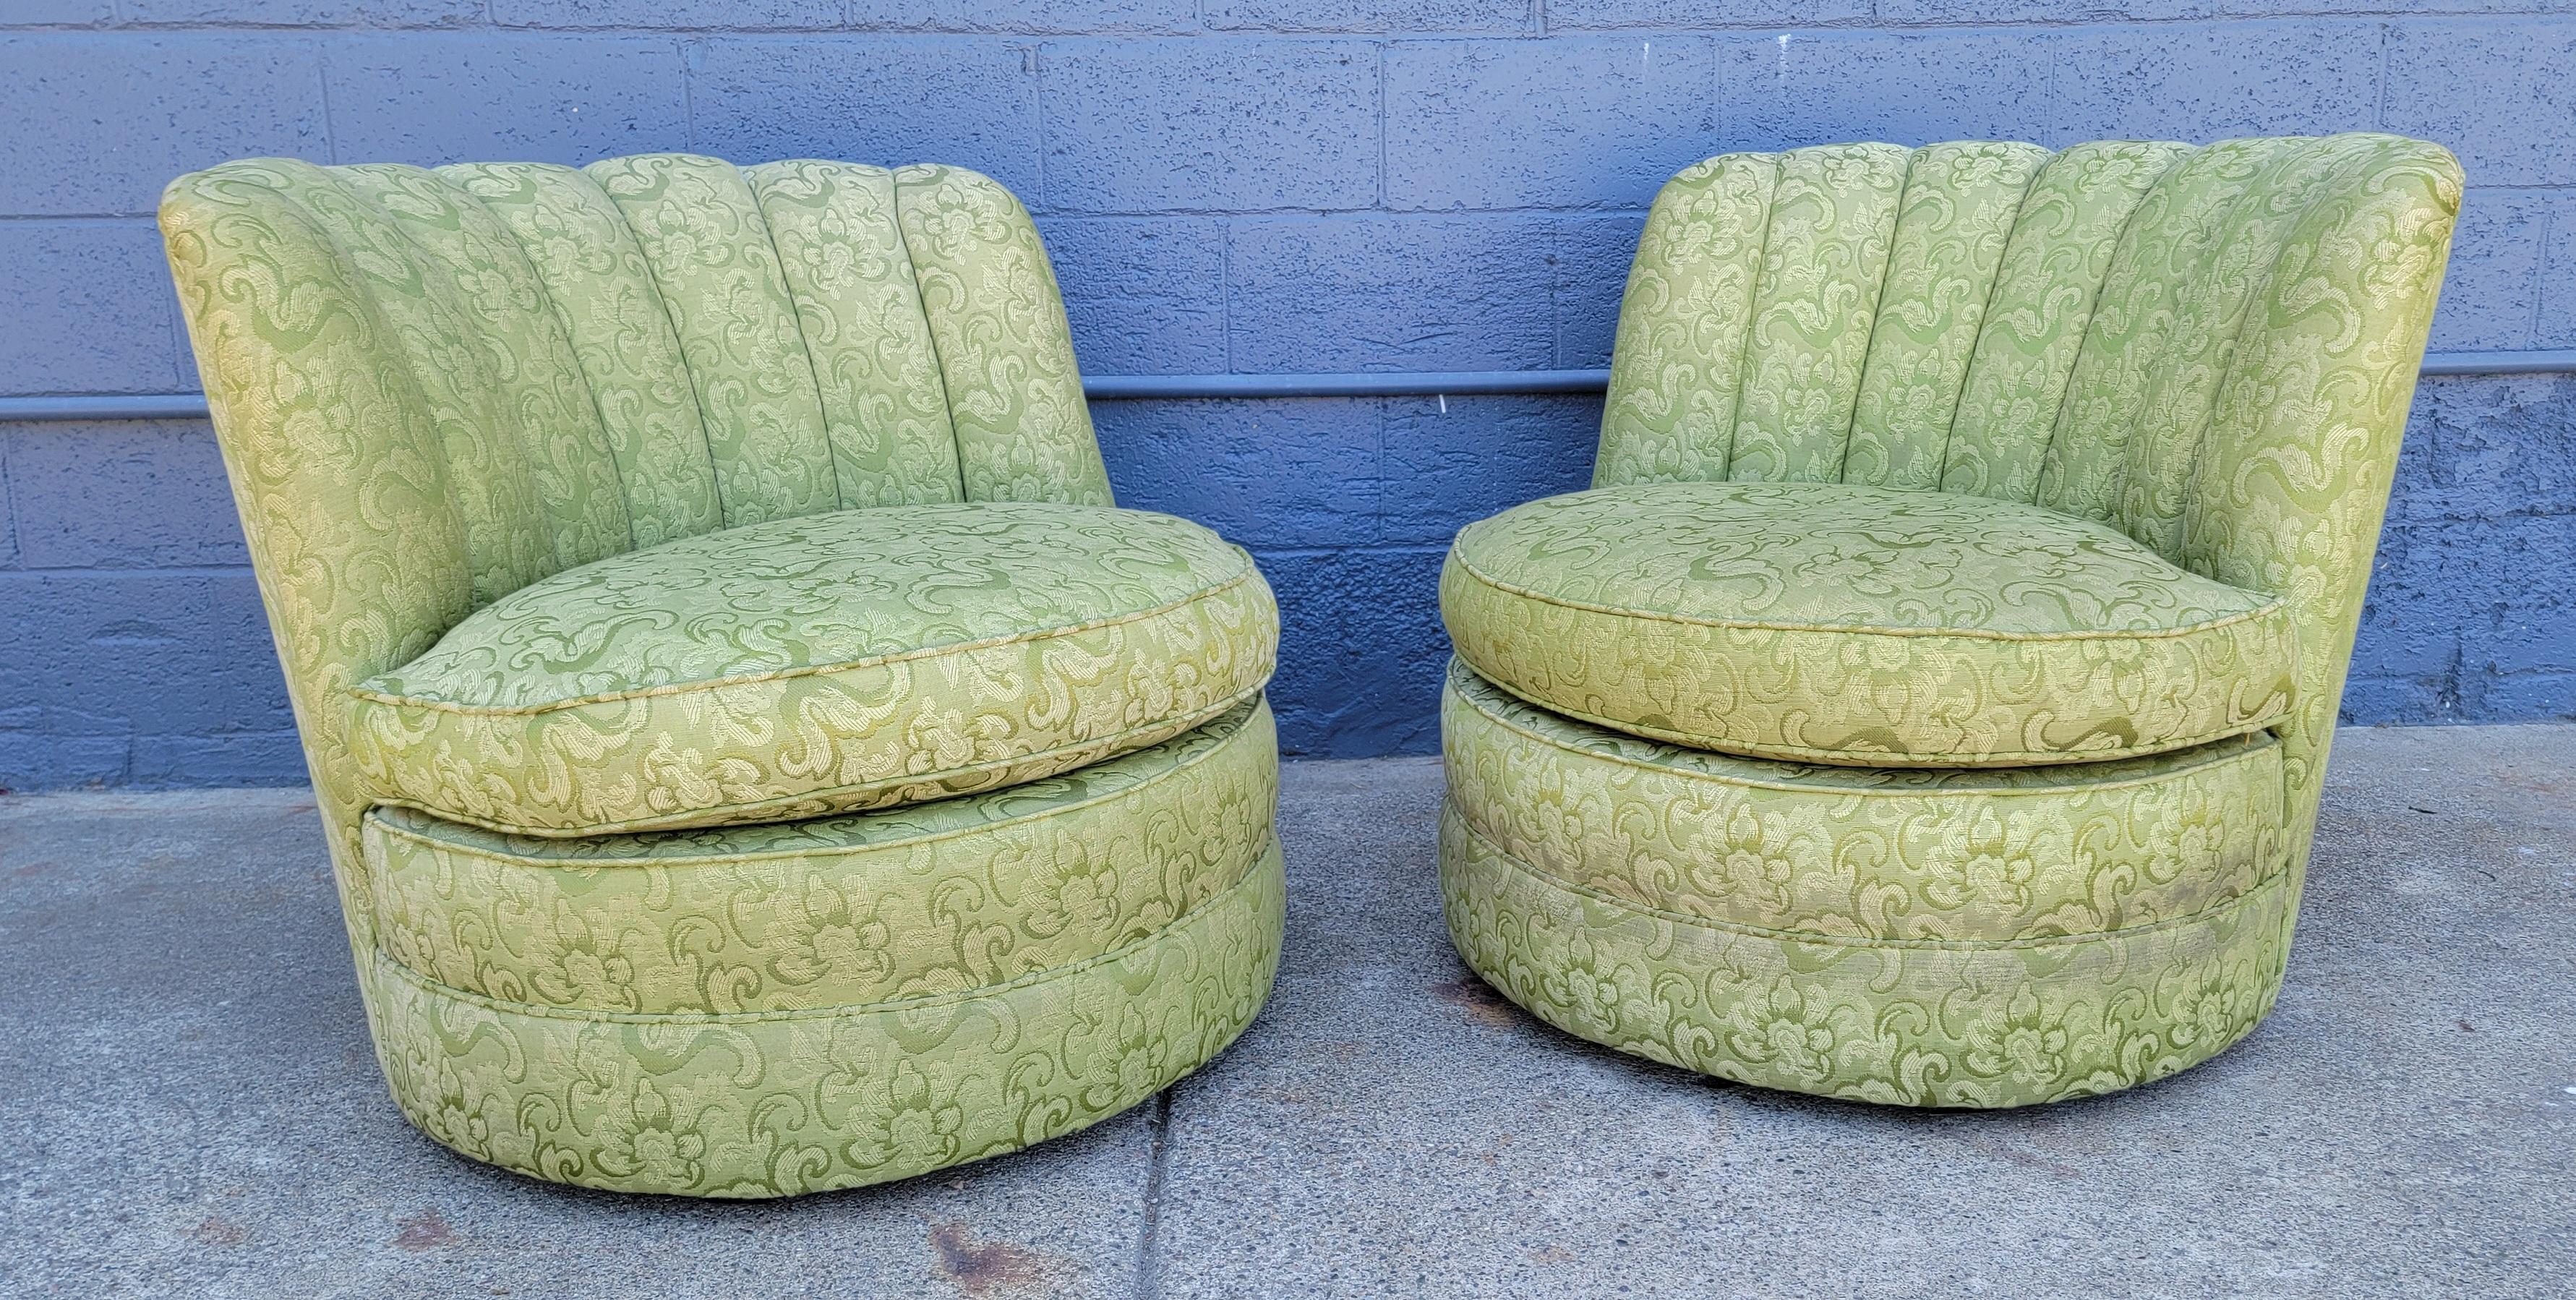 Classic pair of Art Deco style lounge / club / slipper chairs with curved tufted backs and semi-round seats. Older re-upholstery. Quality chairs. Foam and structure in excellent condition, soiling to fabric. New upholstery recommended, therefore,